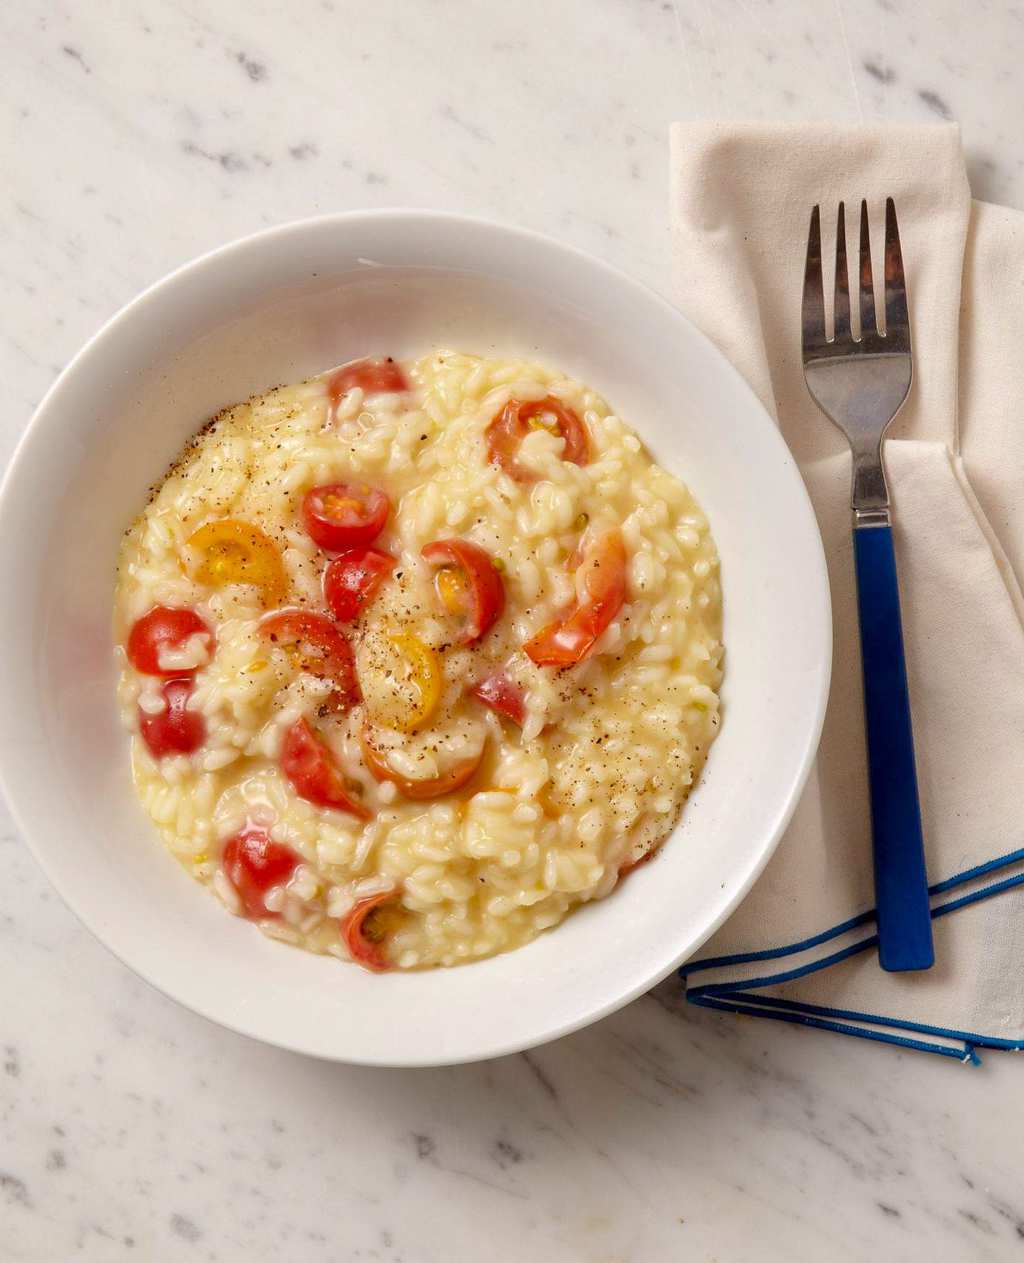 Creamy cherry tomato risotto with fresh tomatoes and cheese in white bowl w blue fork on marble surface